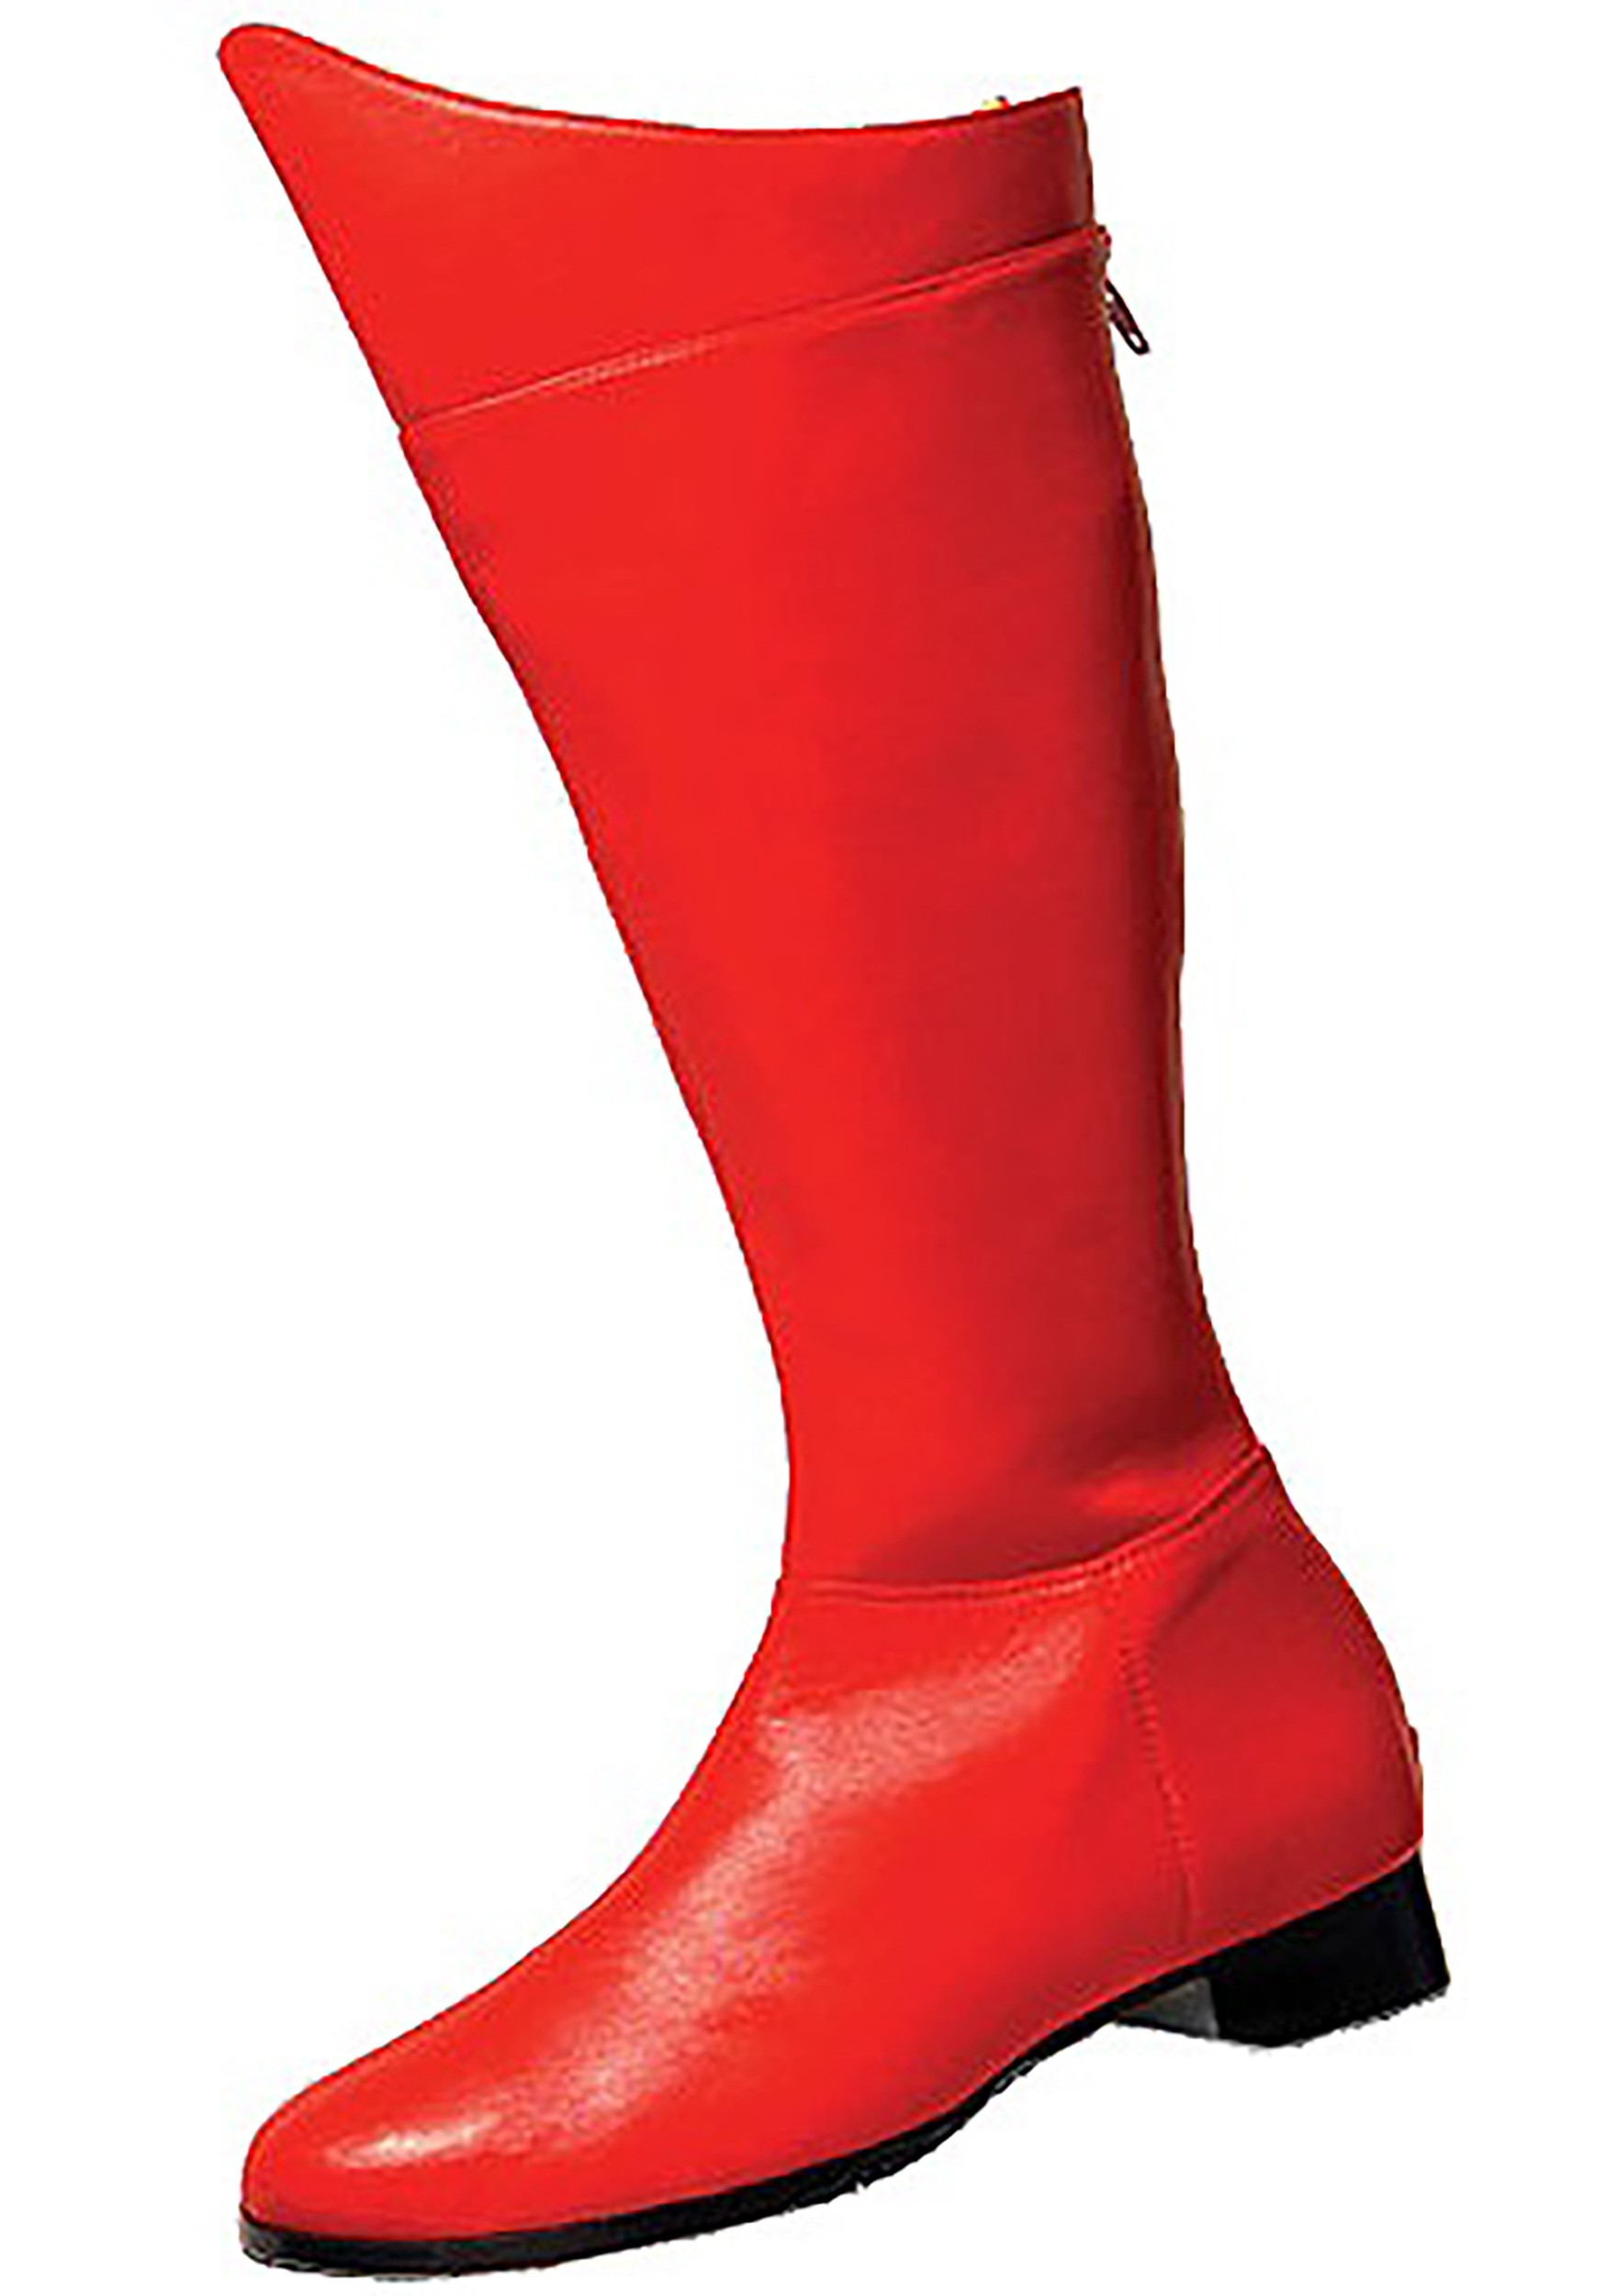 Justice League Superman Cosplay Boots Halloween Red Boots 